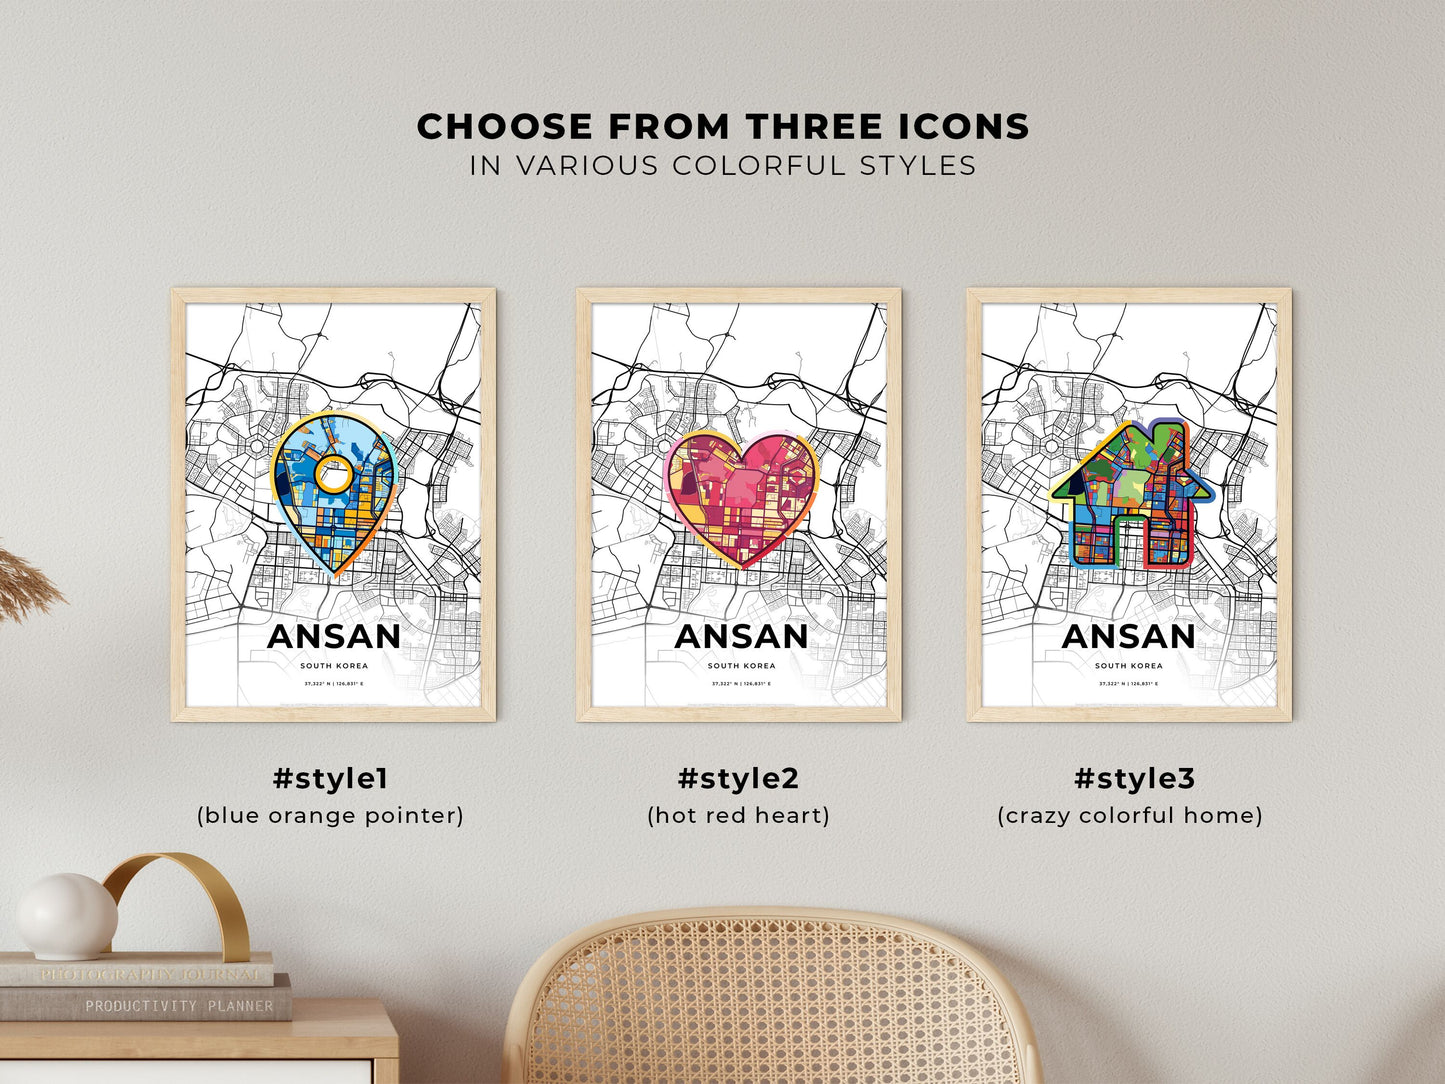 ANSAN SOUTH KOREA minimal art map with a colorful icon. Where it all began, Couple map gift.